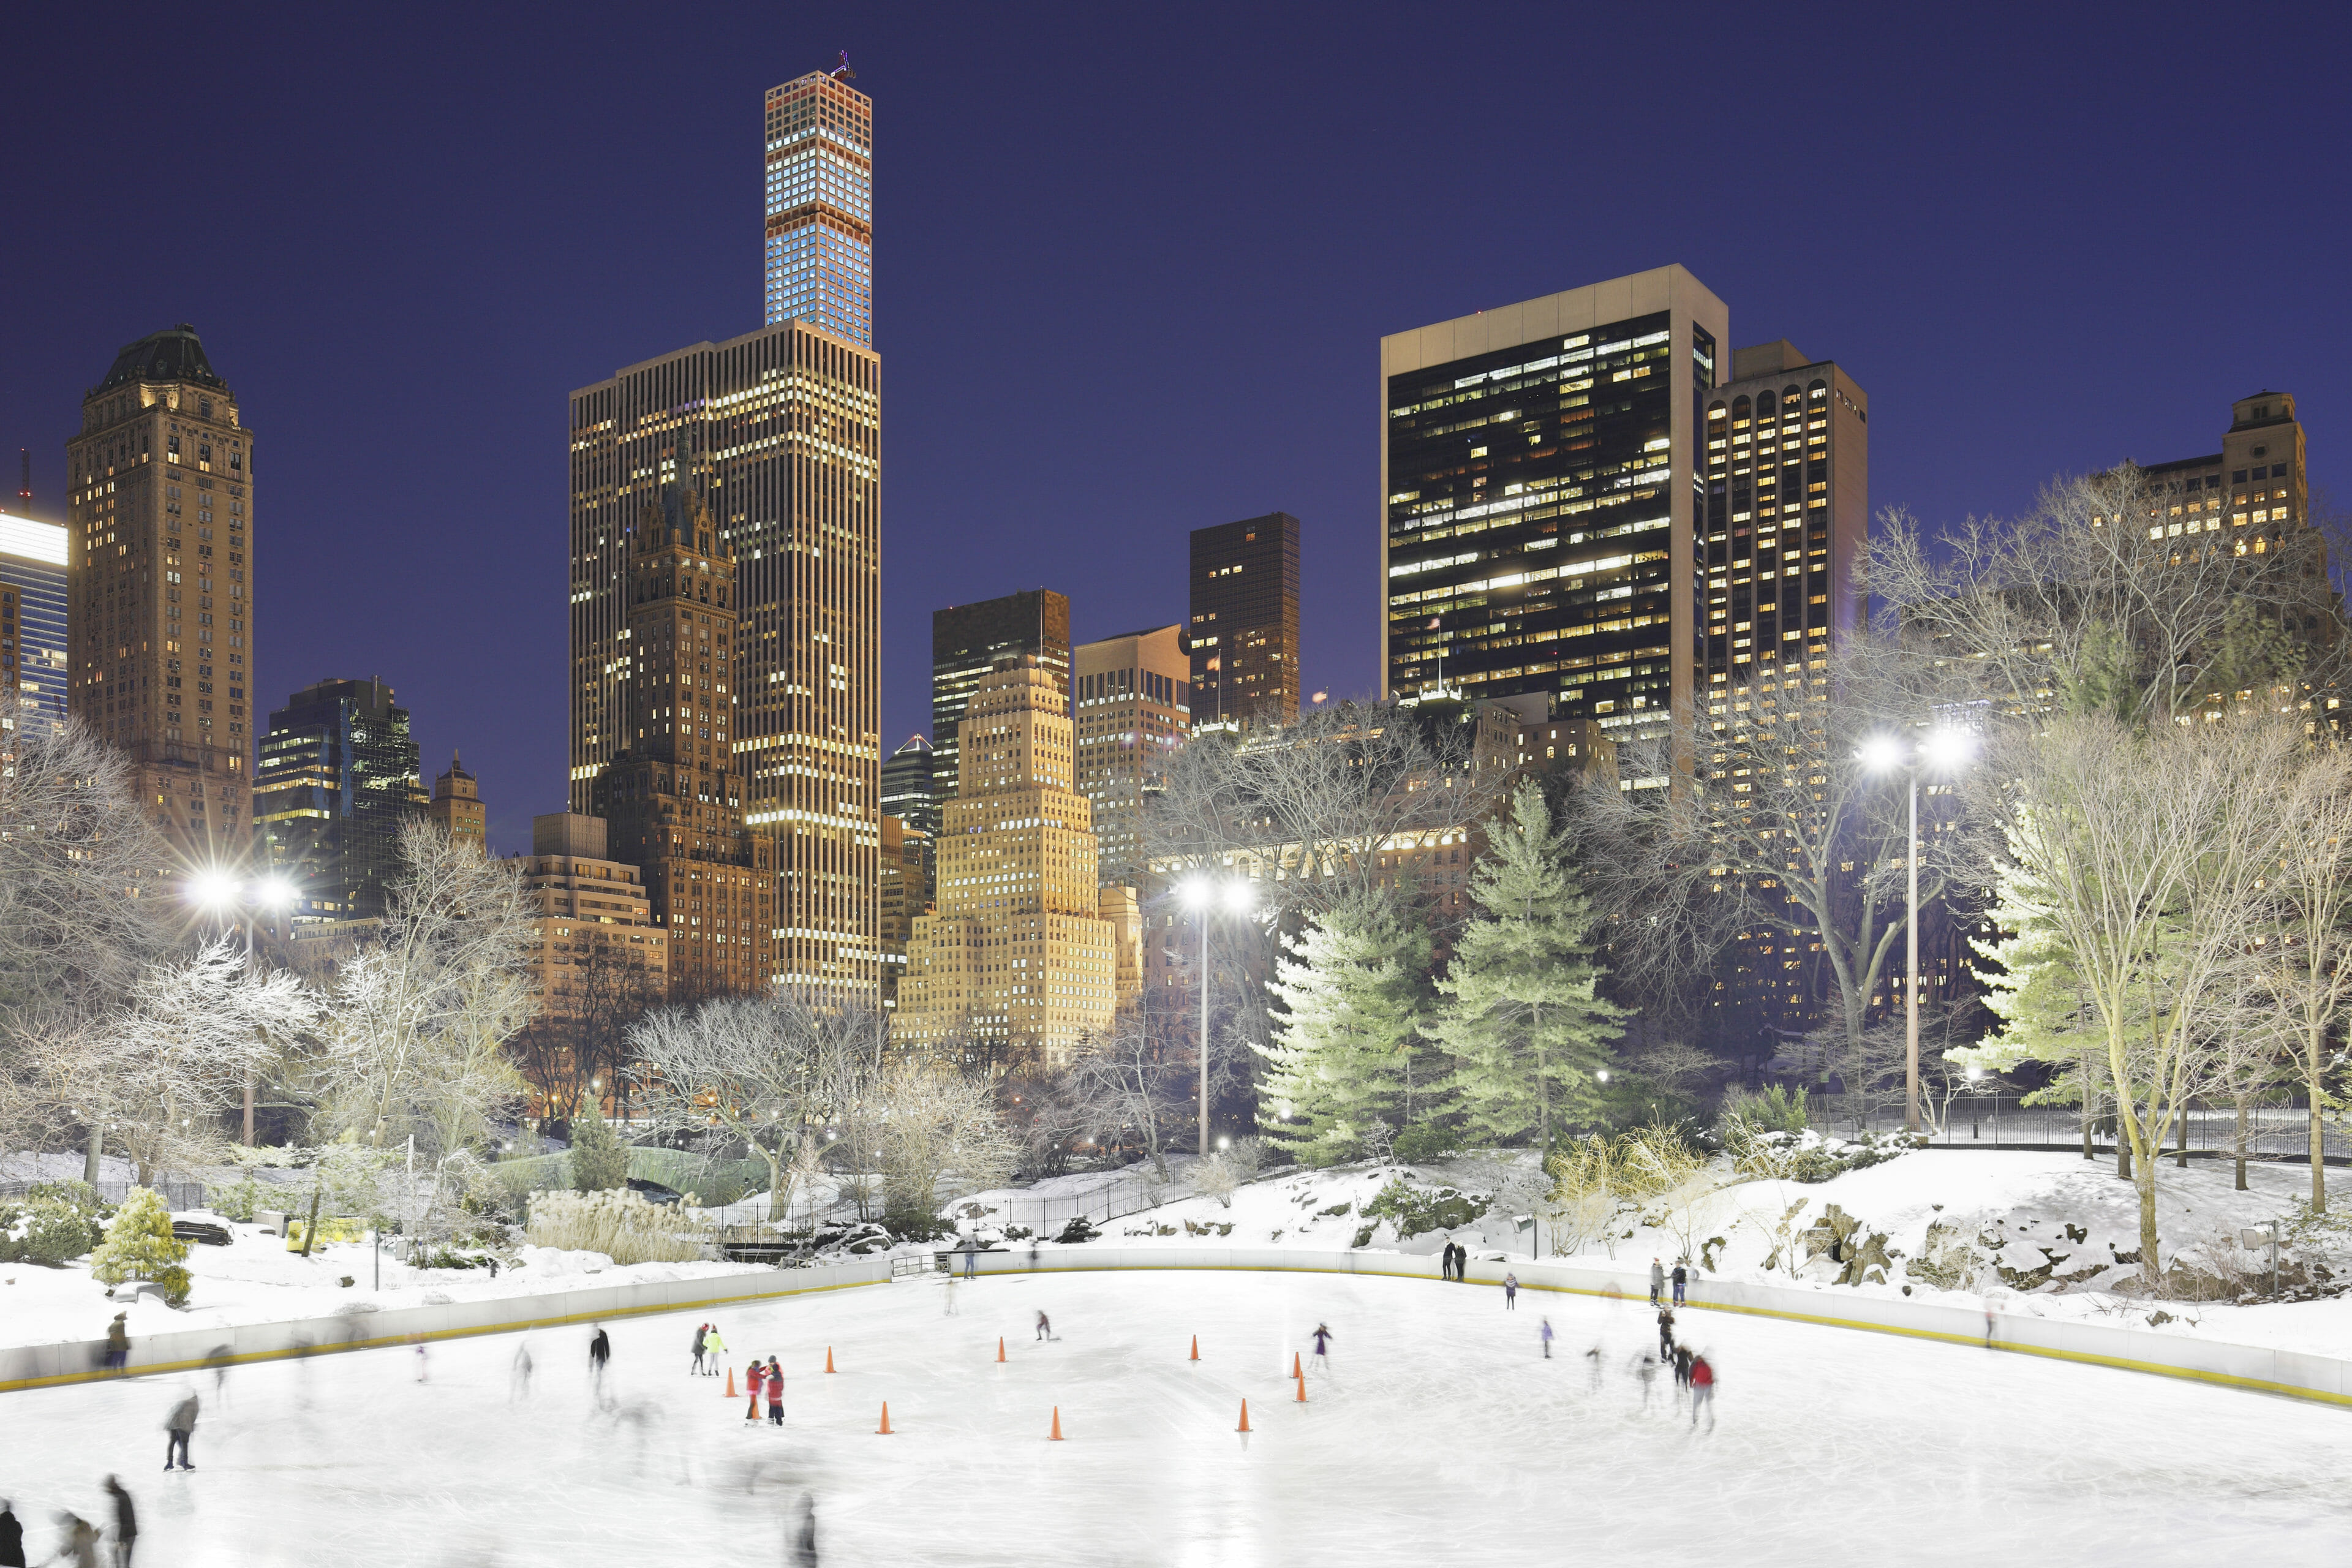 Ice skating in Central Park has been a tradition for residents and tourists alike. At its opening (1858) and for the next century the Central Park Lake was filled with ice skaters. The lake was closed to skaters when Wollman Rink opened in 1950 putting skaters beneath the city skyline.